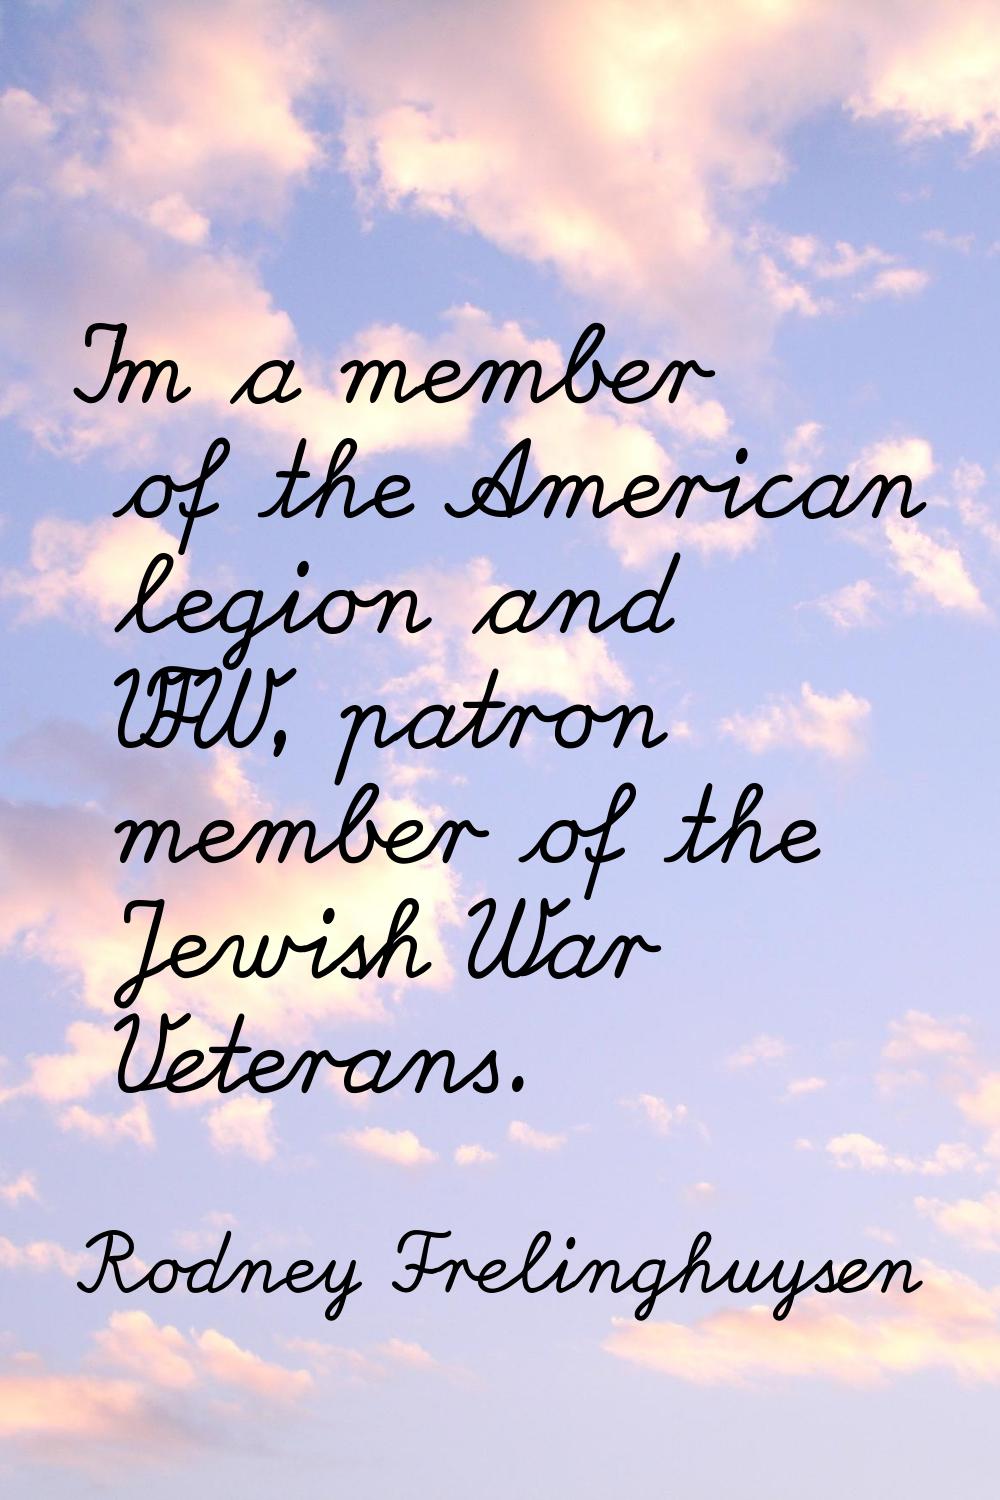 I'm a member of the American legion and VFW, patron member of the Jewish War Veterans.